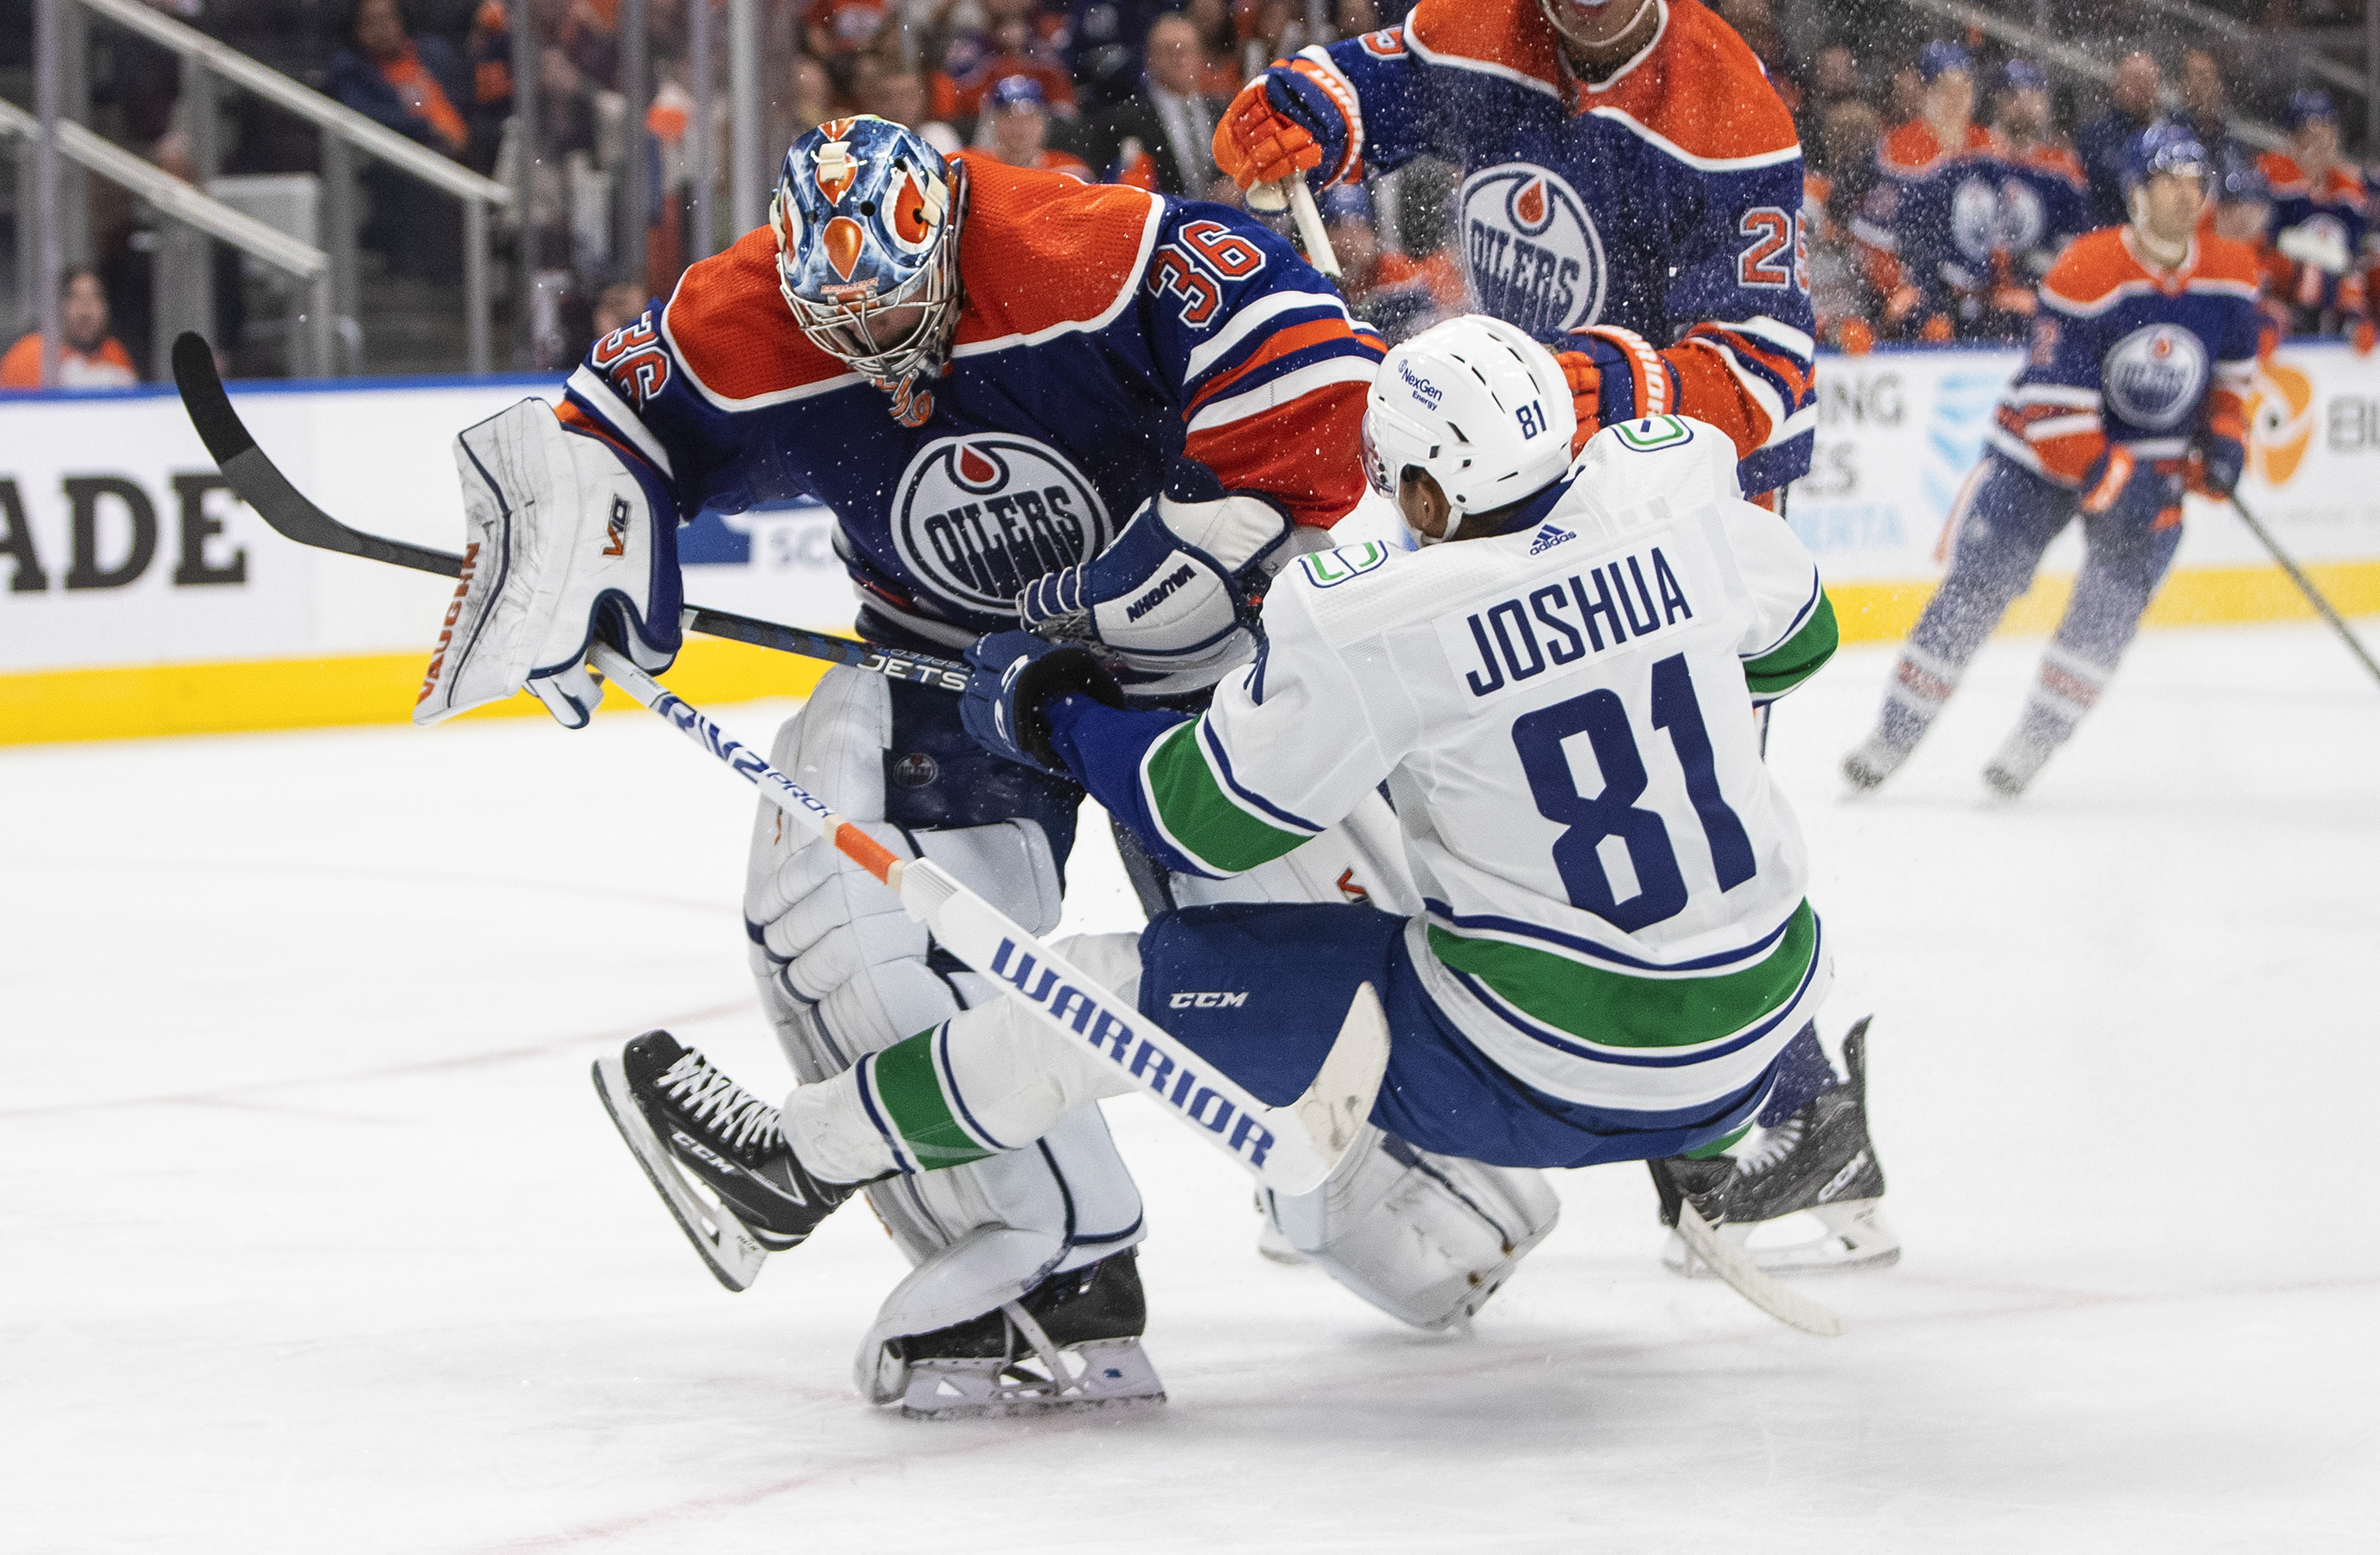 Vancouver Canucks can't hold a 3-0 lead against the Oilers